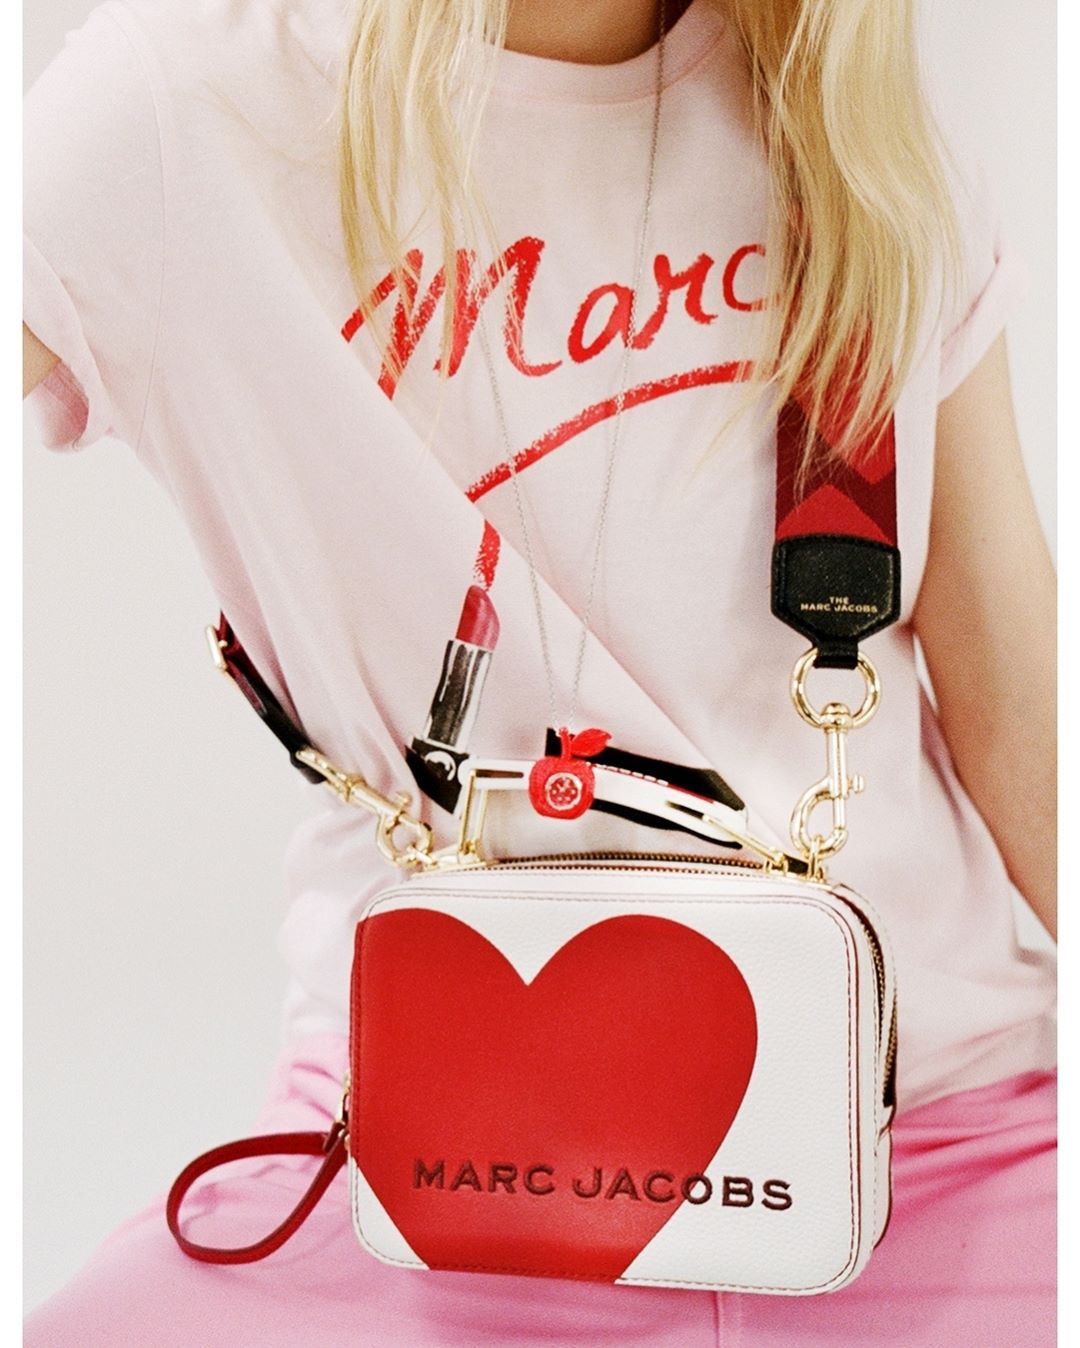 Au Pont Rouge - #THEMARCJACOBS extra 40%❗
#aupontrouge
#aupontrougeonline
#happyjune
❤️❤️❤️